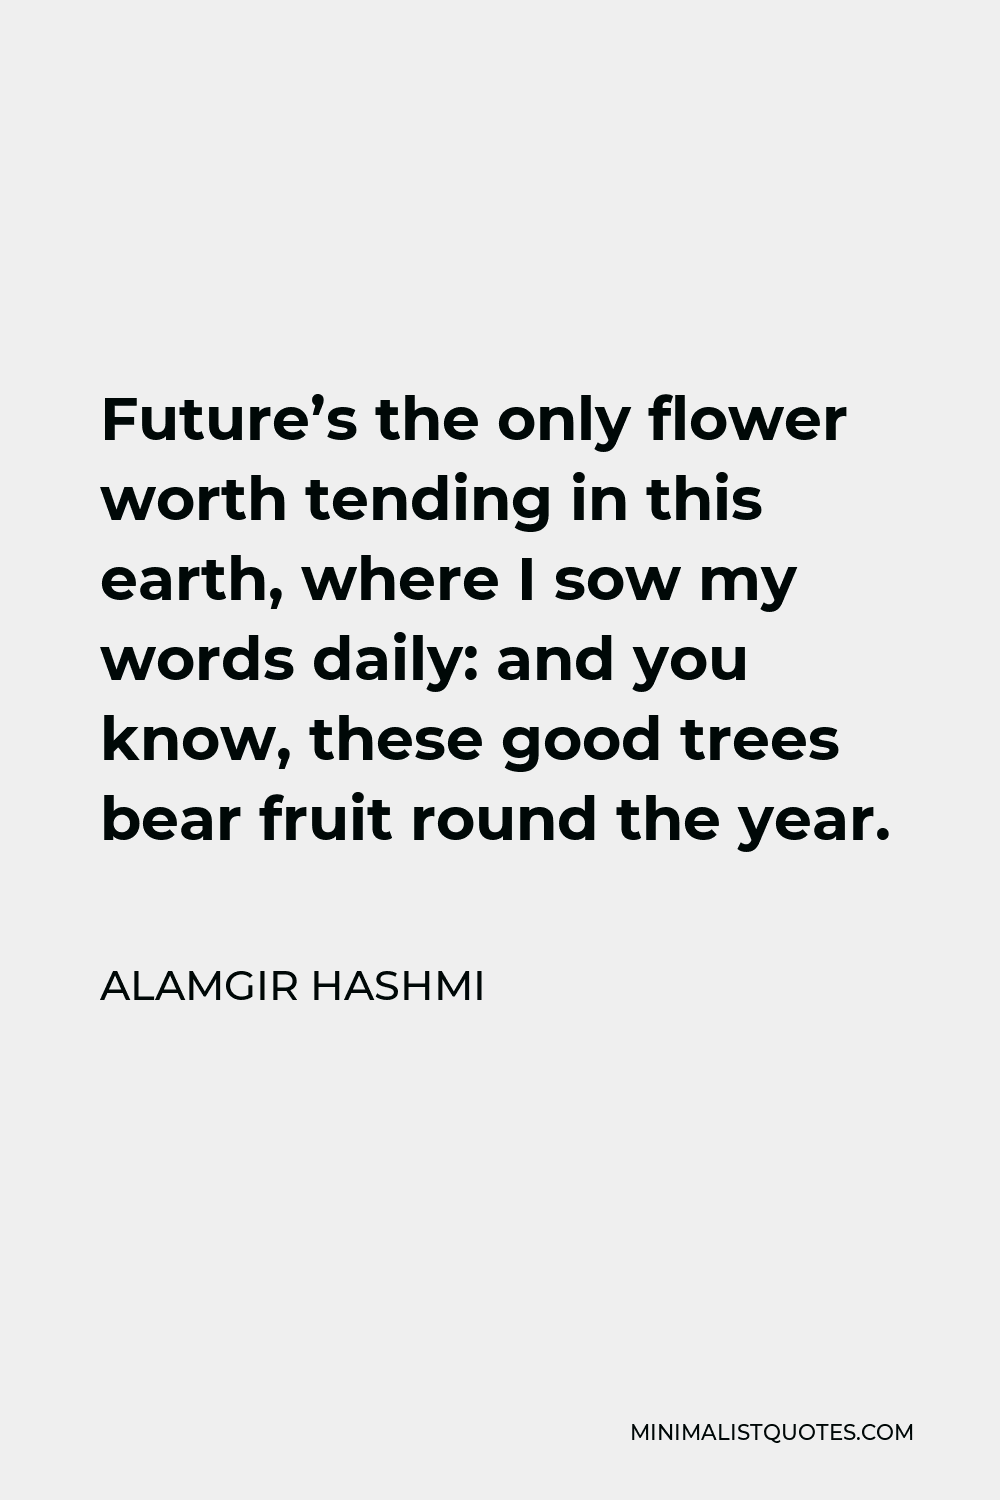 Alamgir Hashmi Quote - Future’s the only flower worth tending in this earth, where I sow my words daily: and you know, these good trees bear fruit round the year.